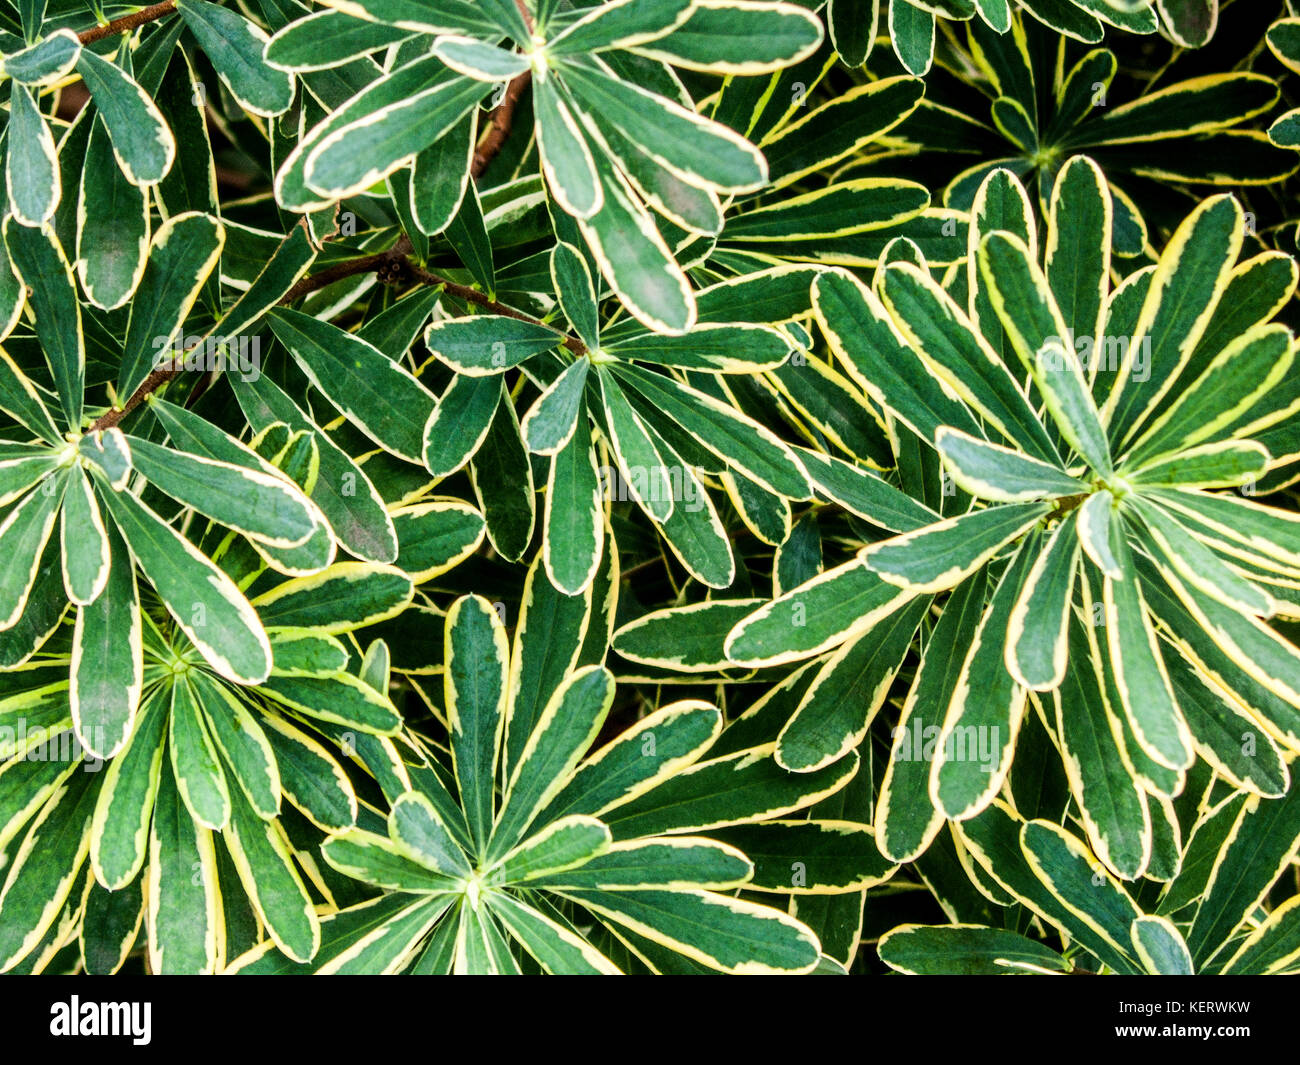 High Angle View of Green Plant Leaves with Yellow Borders Stock Photo